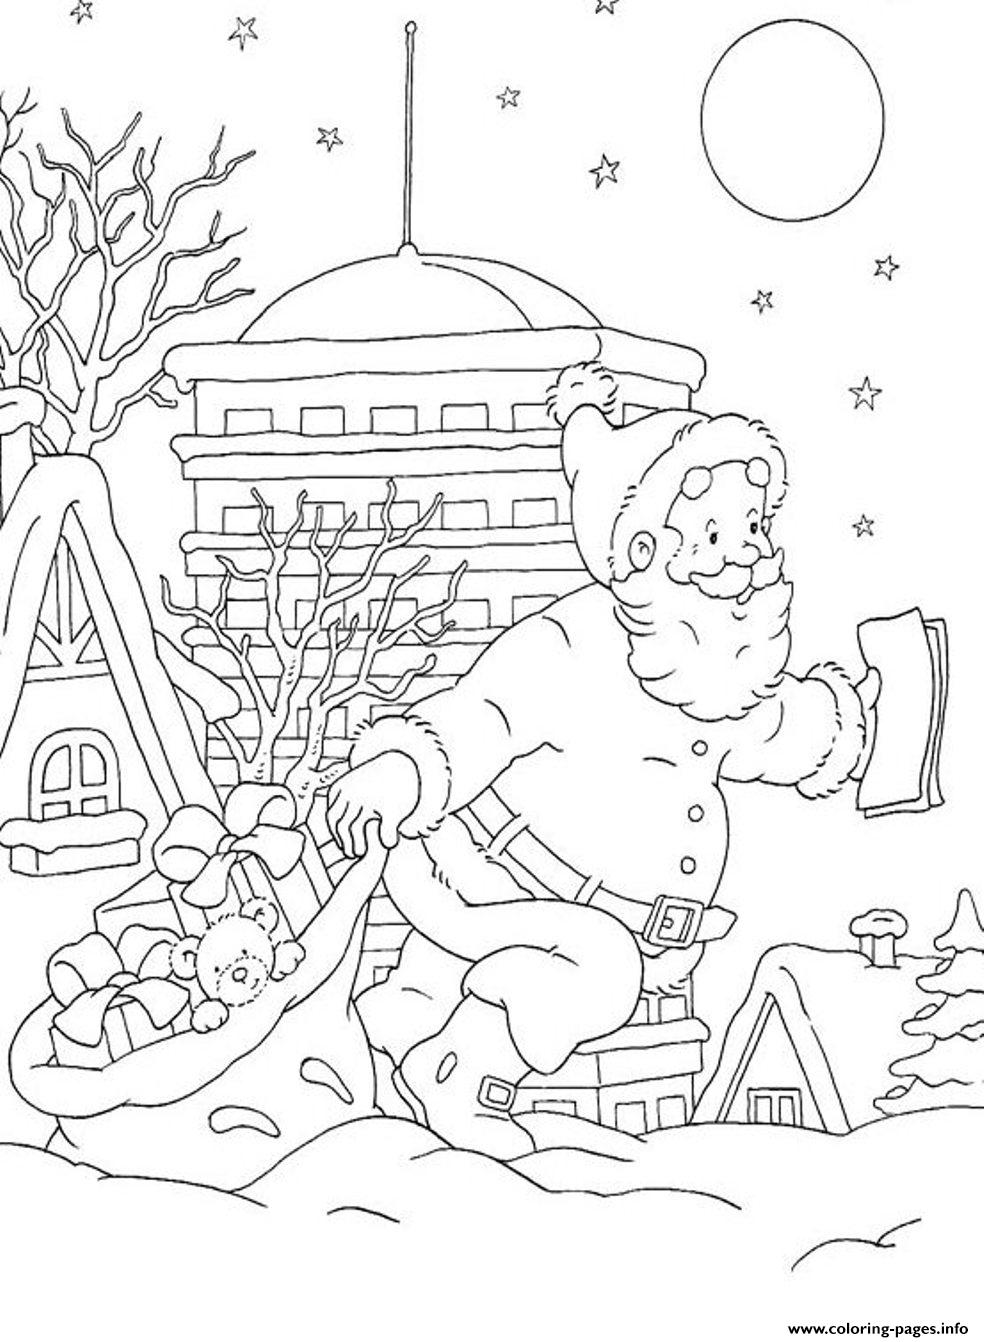 Coloring Pages Of Santa Claus Doing His Job76d8 coloring